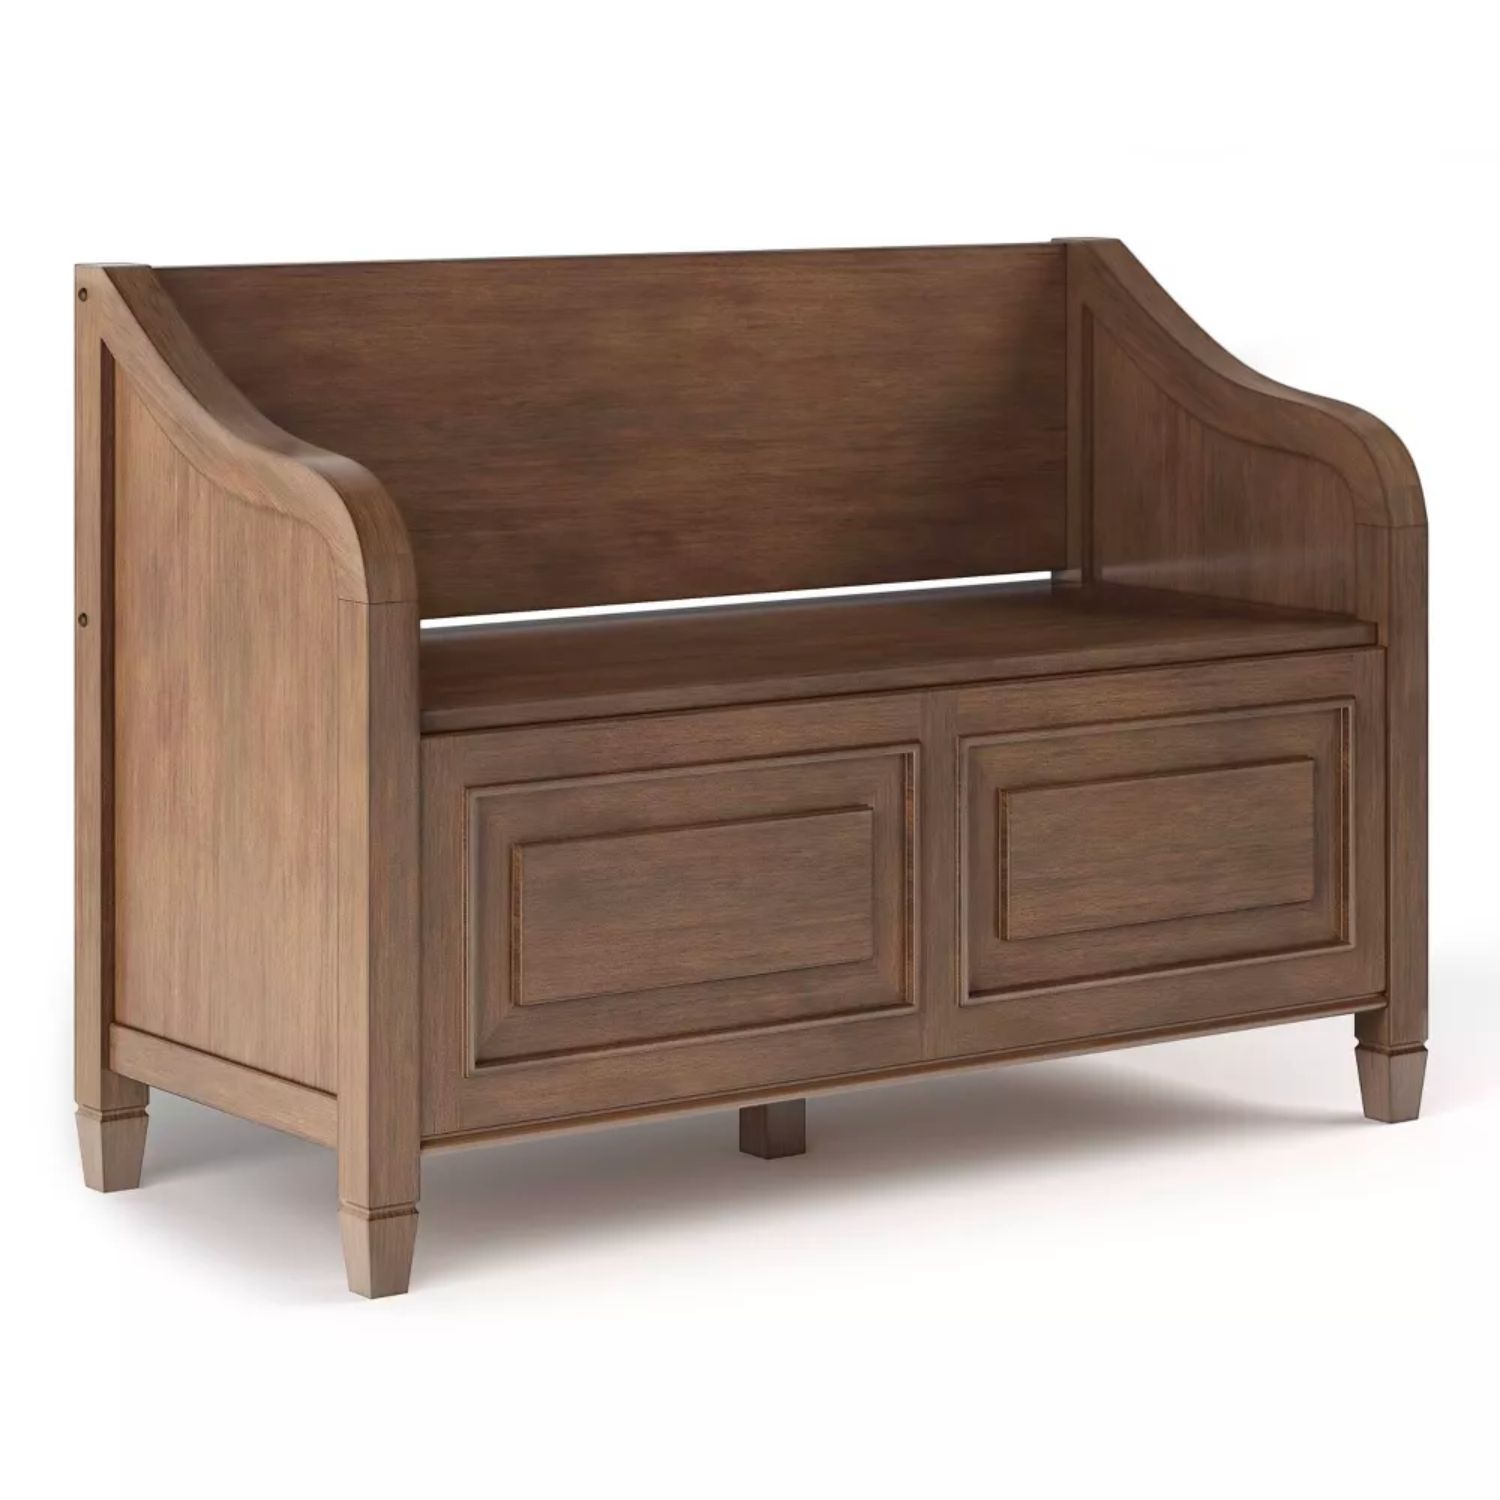 The Best entryway Decor For a Summer Refresh Option: Hampshire Entryway Storage Bench